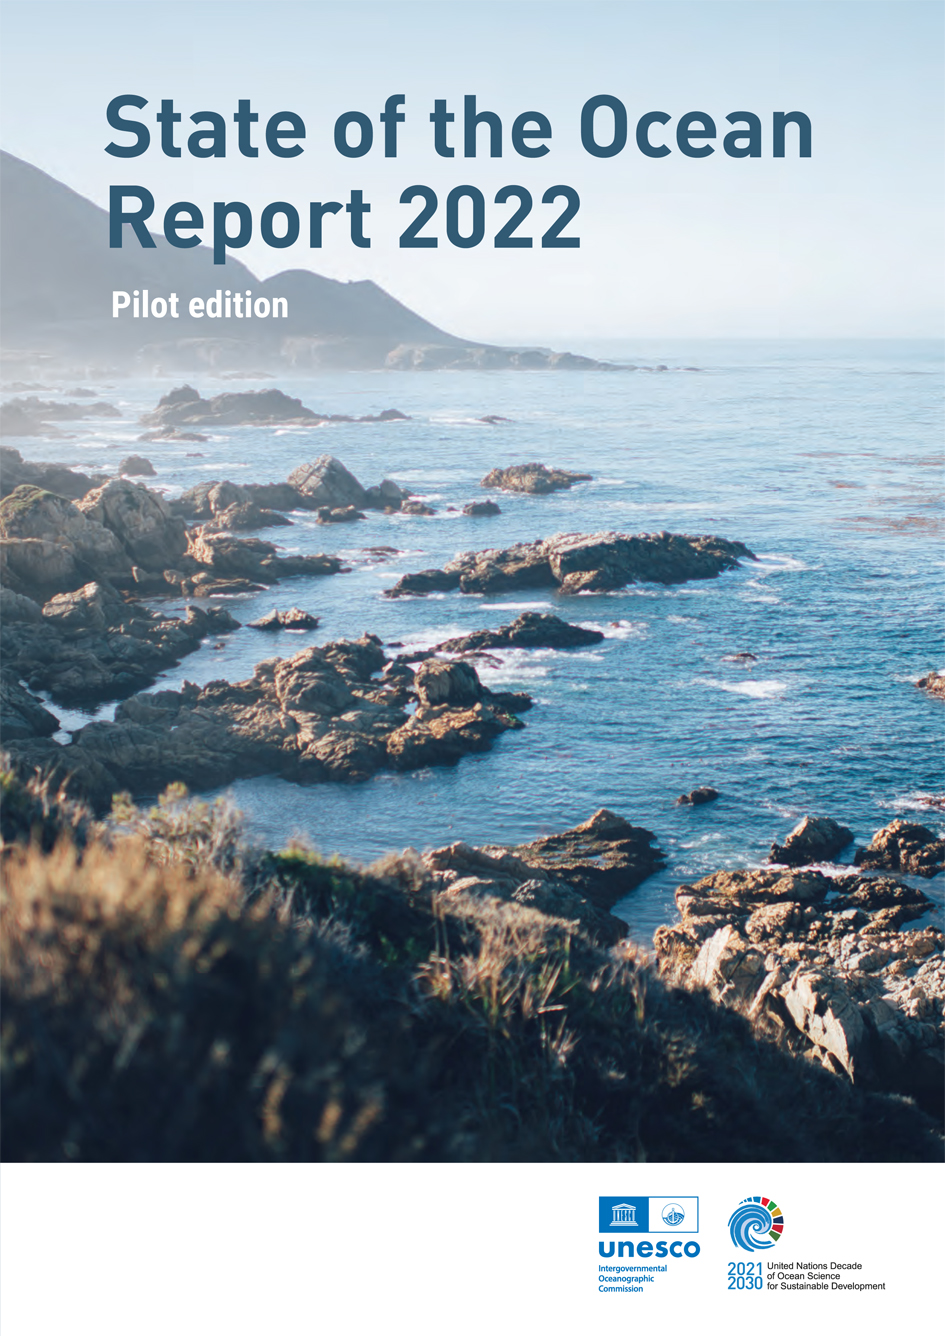 New State of the Ocean Report to monitor progress in meeting global goals